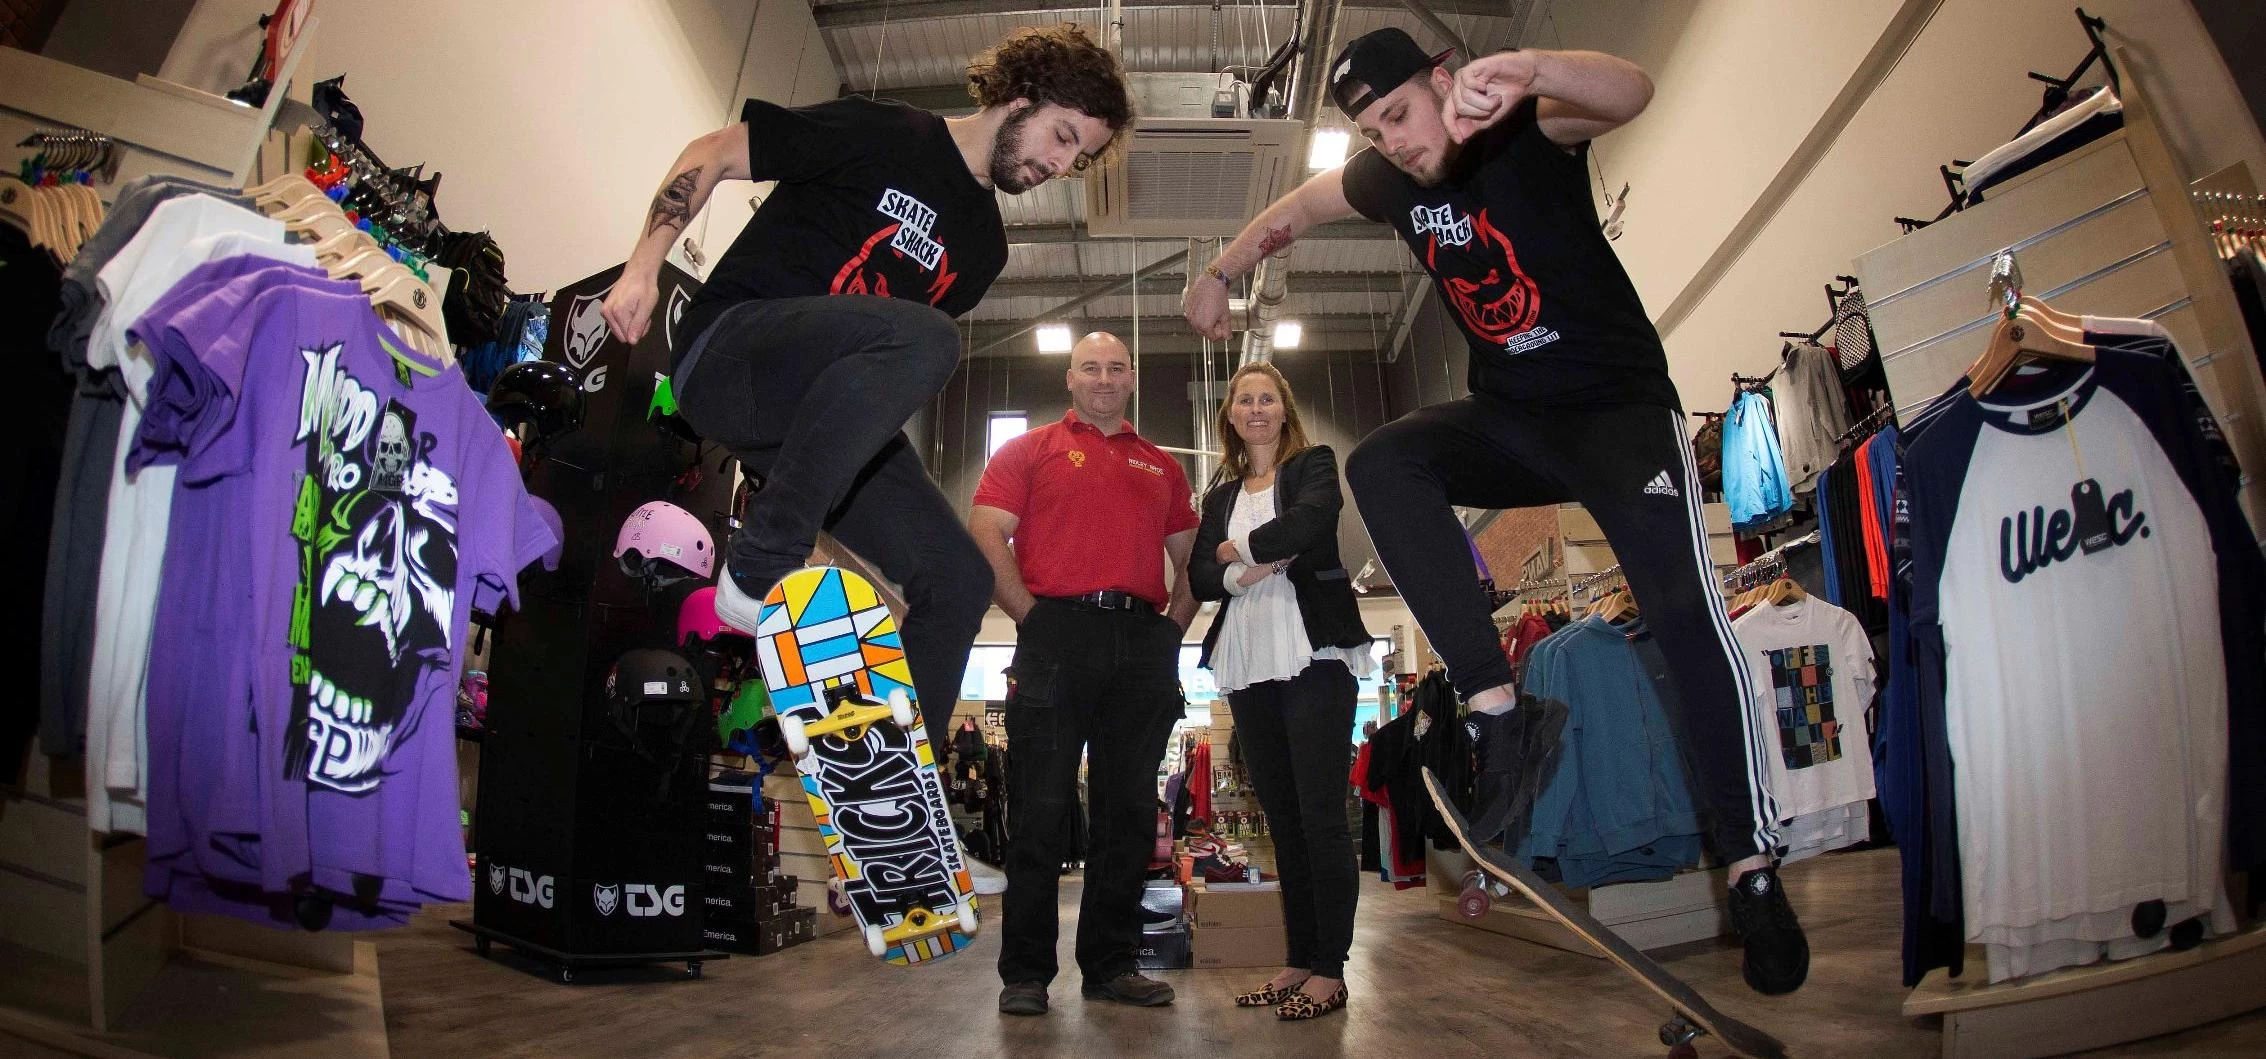 (Centre) Ridley Bros Andrew Ridley and Paula Elliot from Skate Shack.  